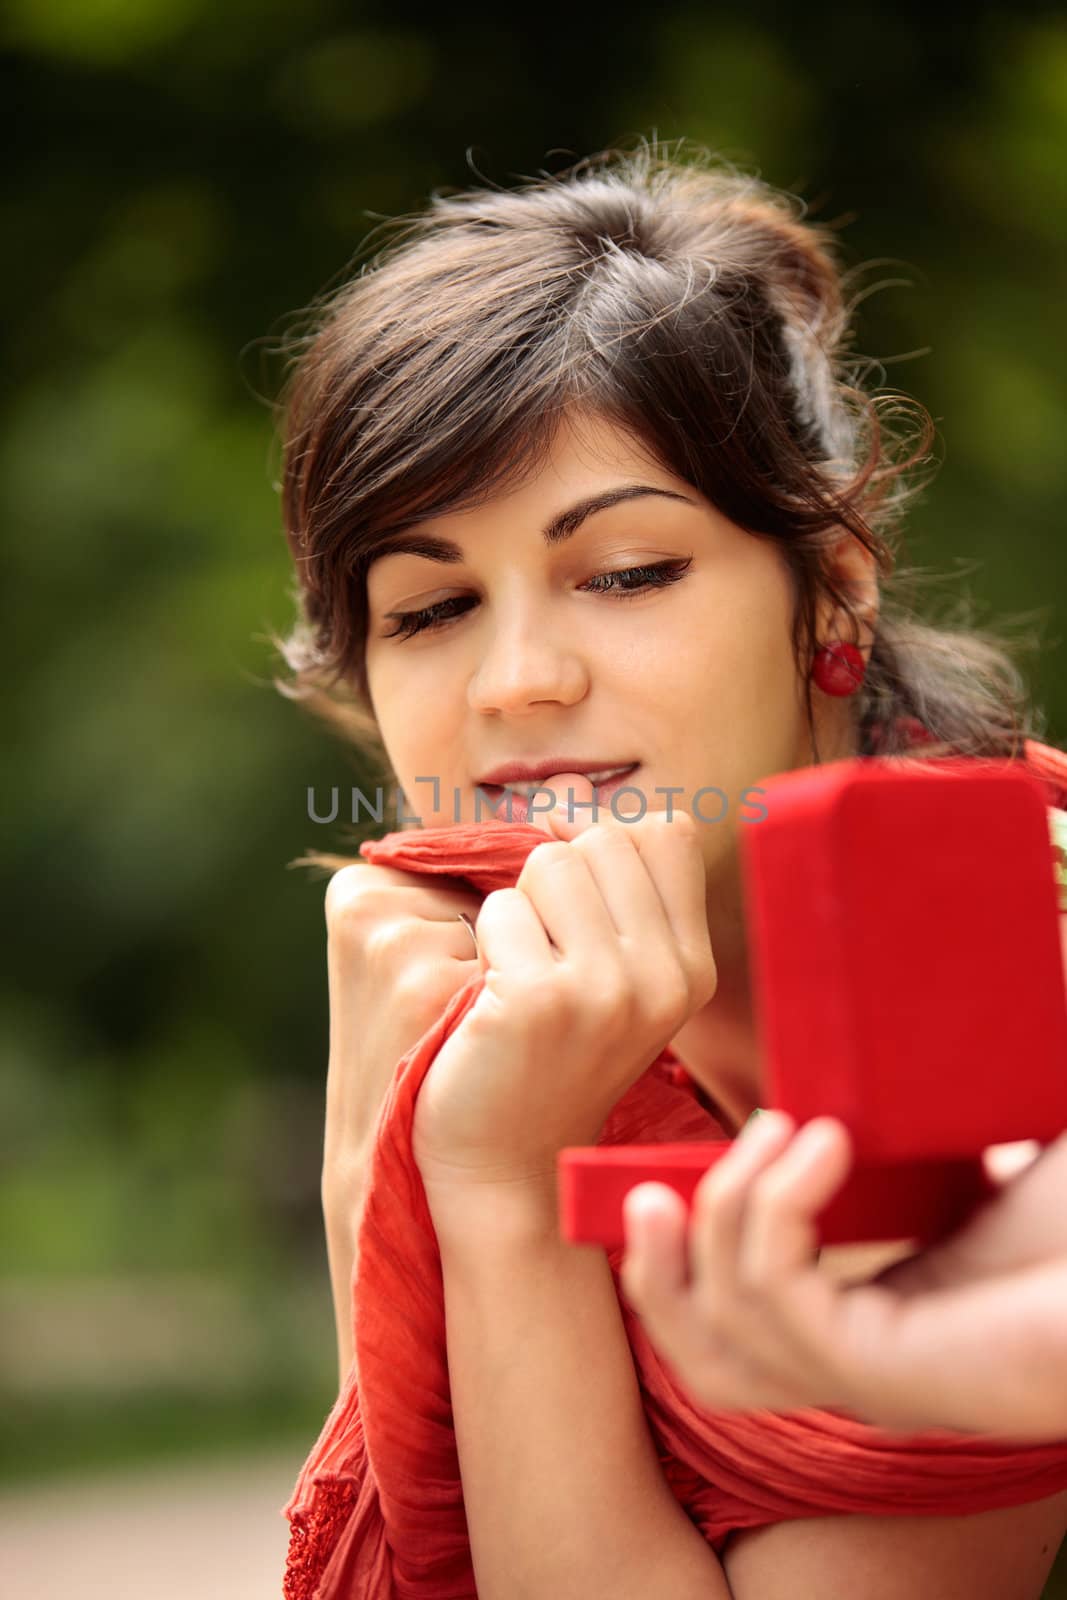 young attractive girl looking at red ring box presented to her by someone